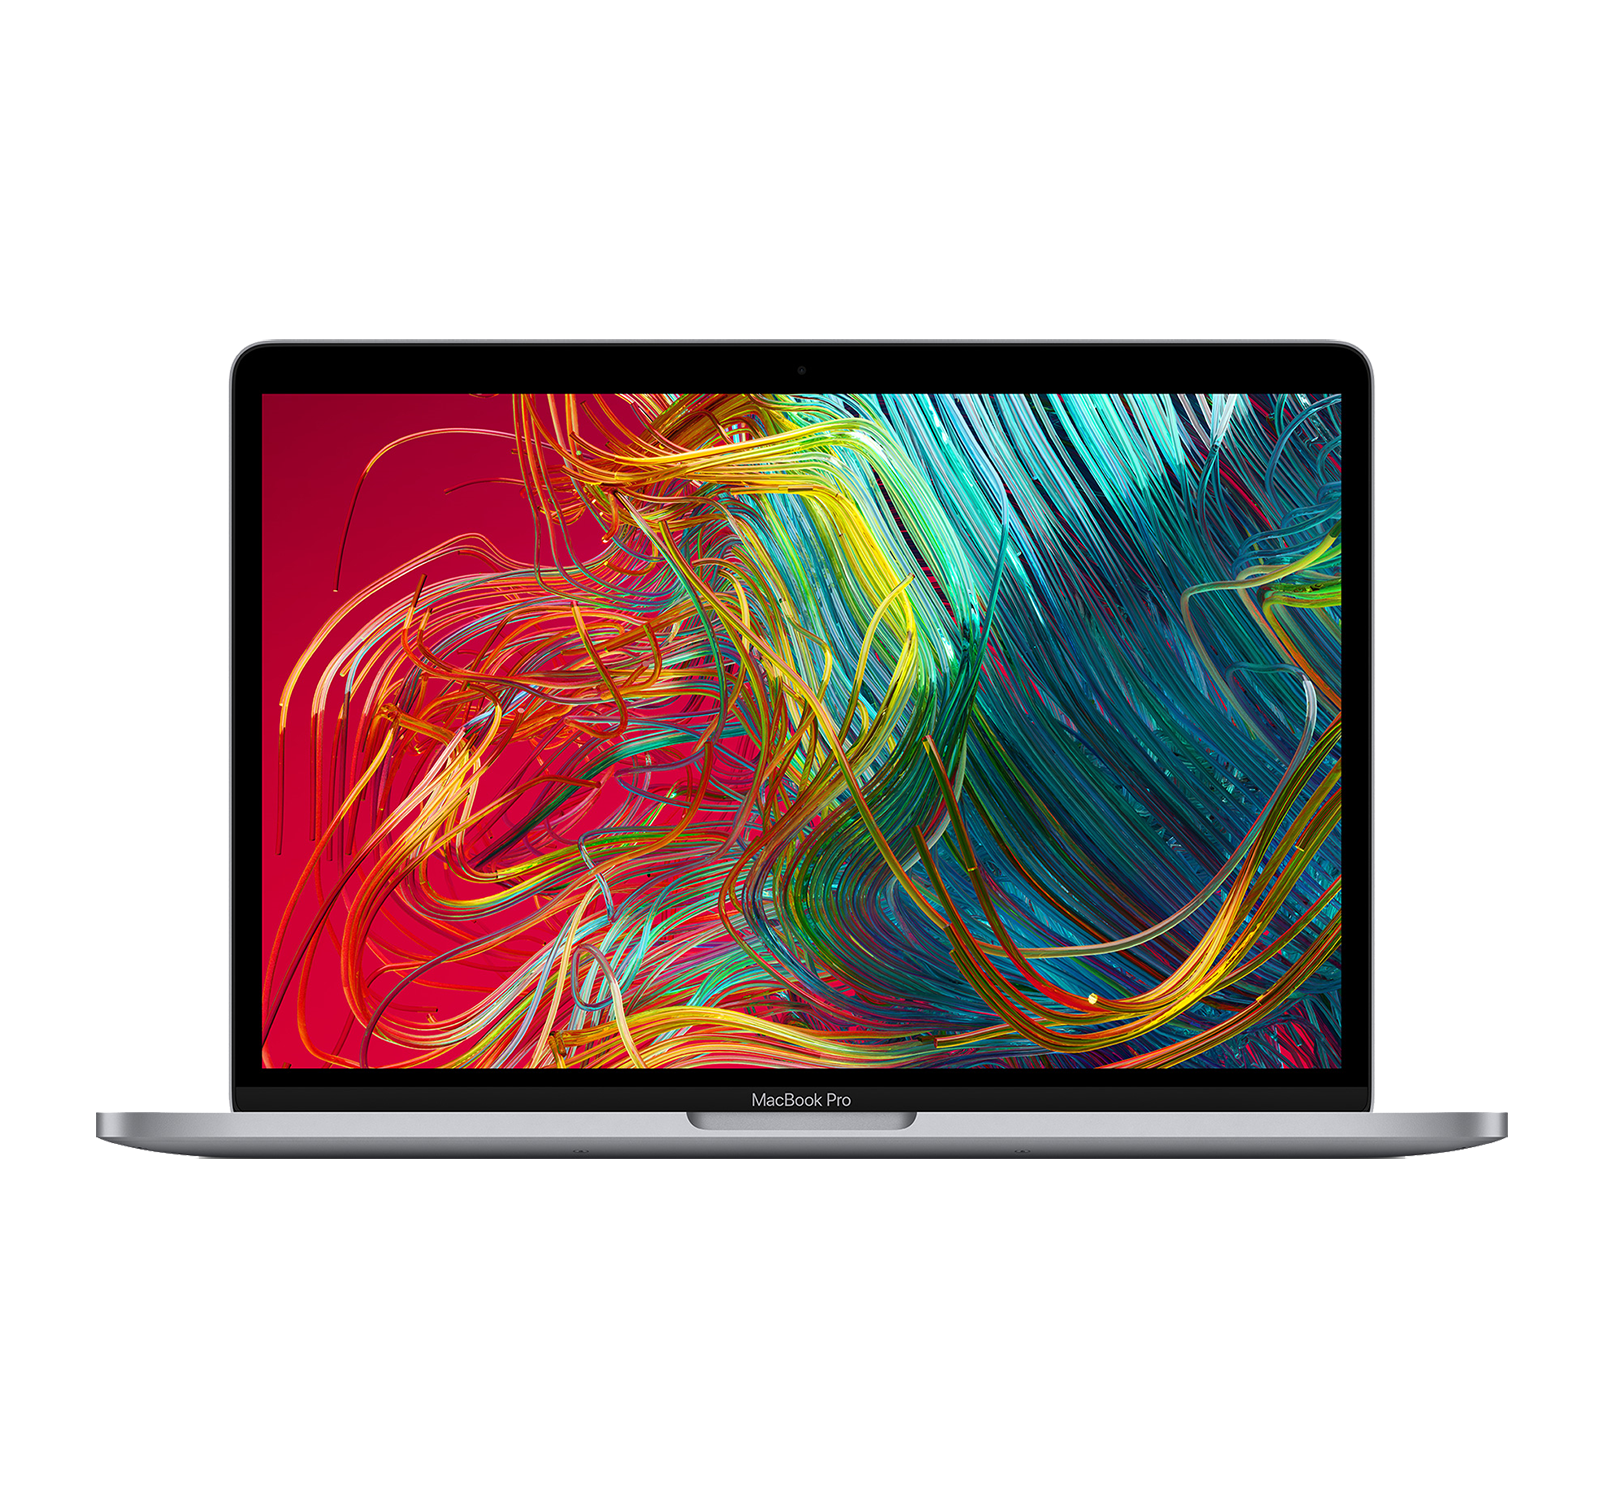 MacBook Pro 13 inch price on Space Gray model